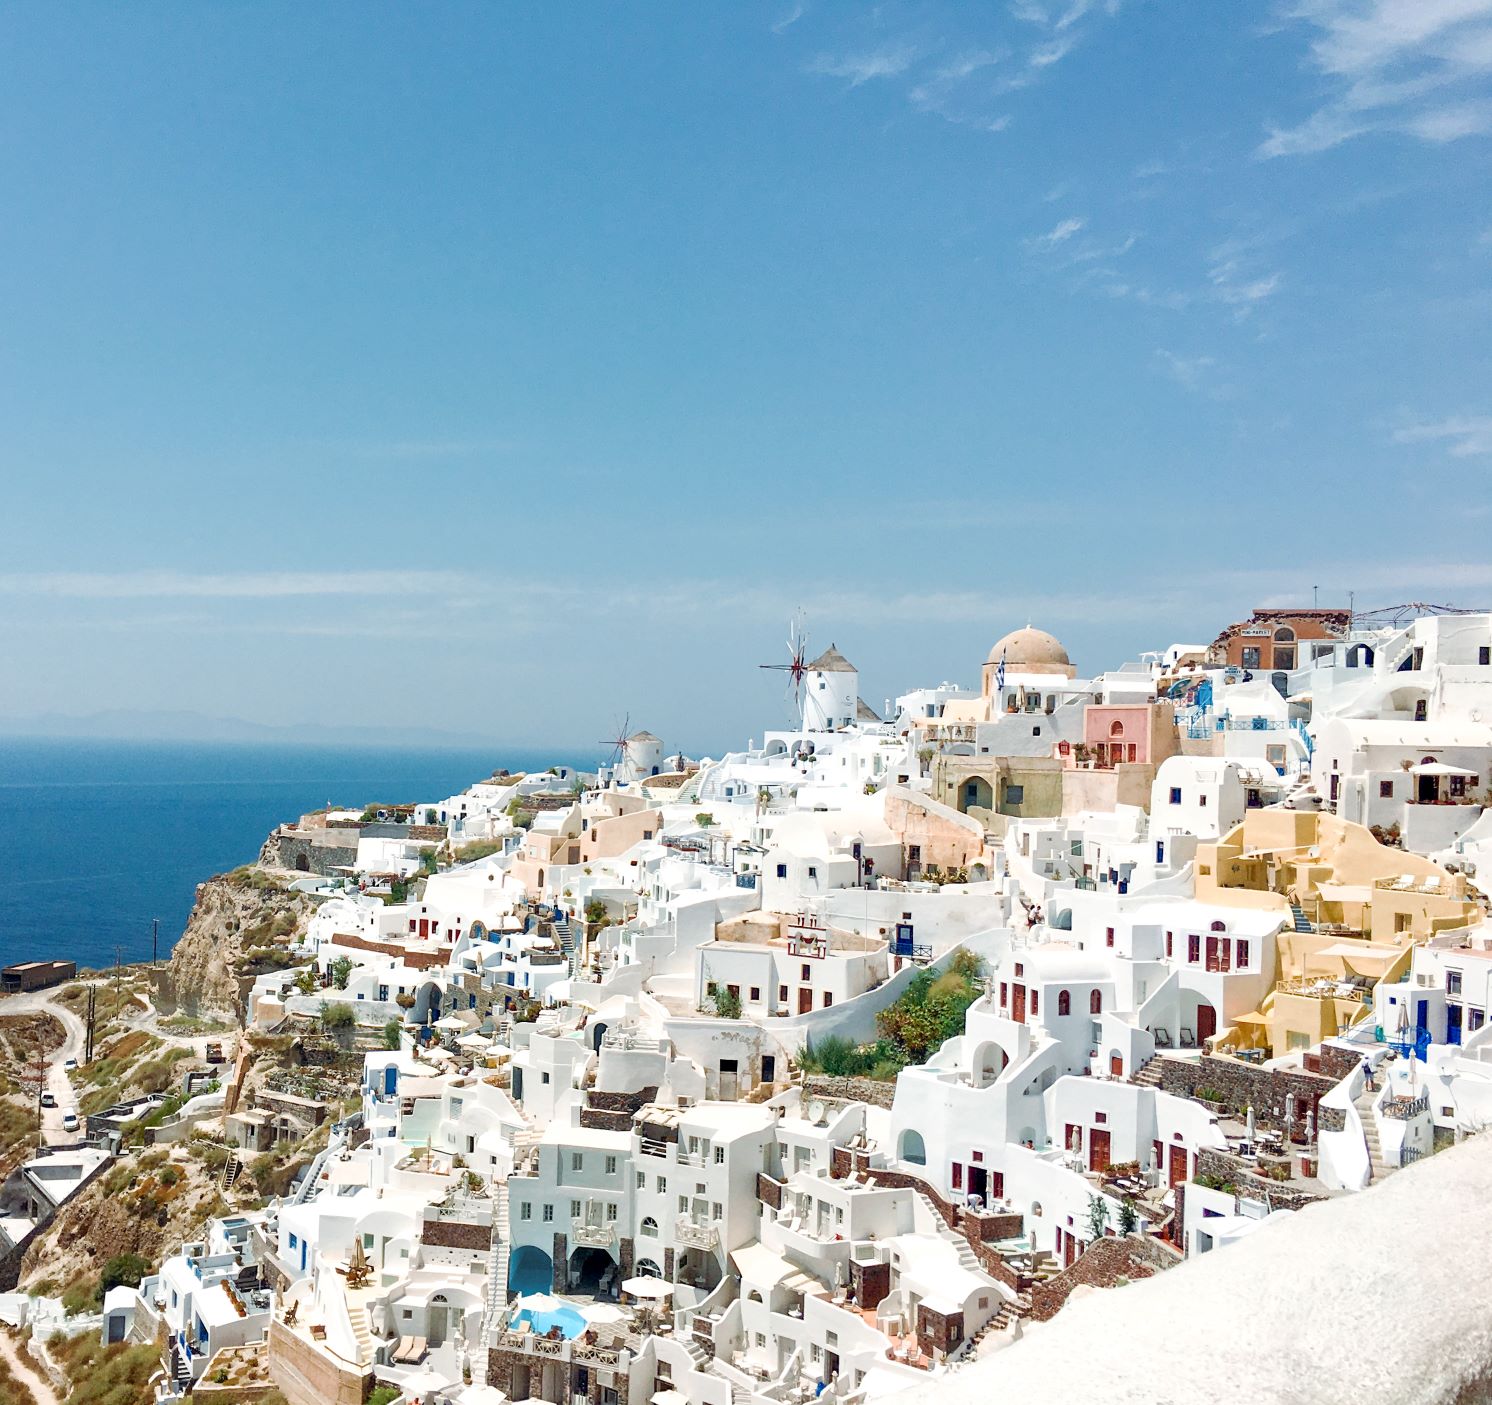 The most iconic shot of Santorini is in Oia, where white buildings shine in the sun.